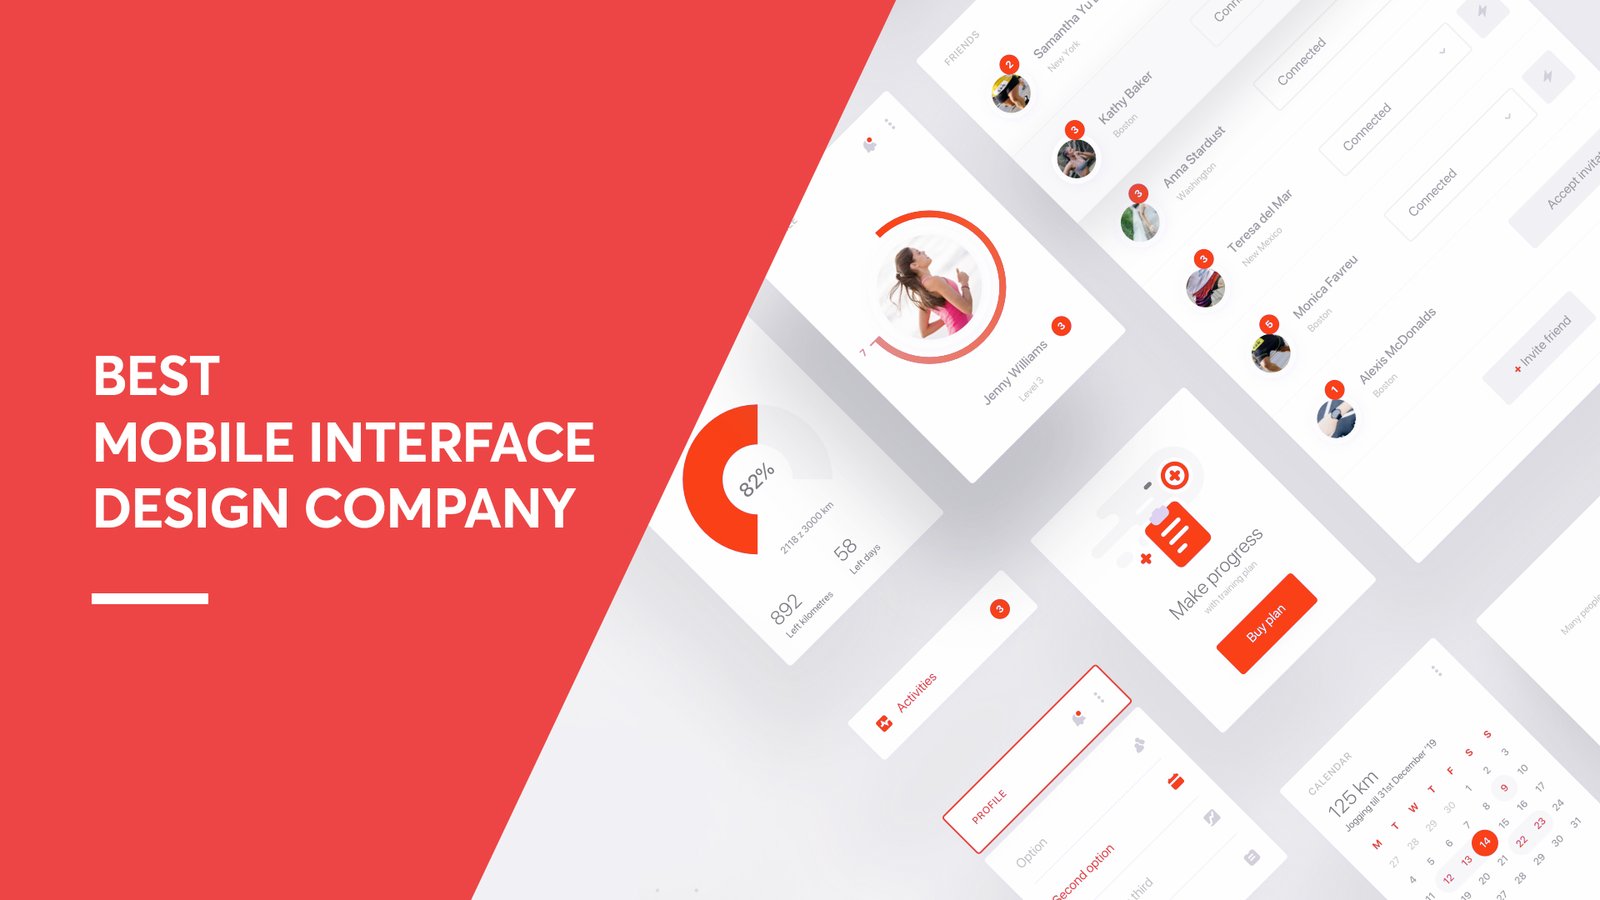 How to Find Best Mobile Interface Design Company?